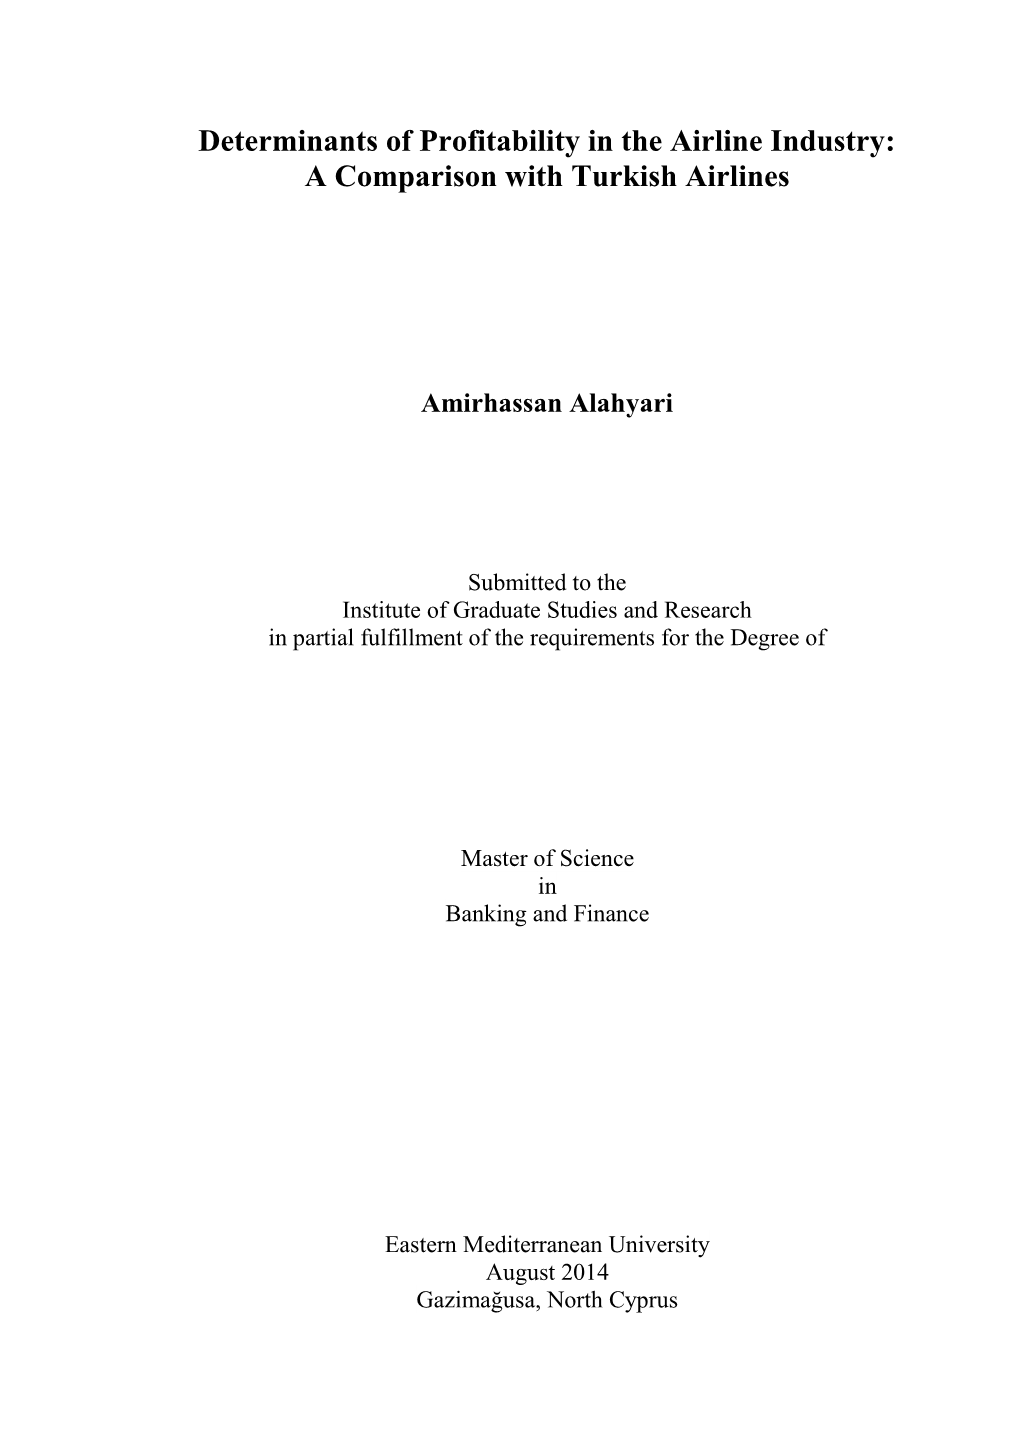 Determinants of Profitability in the Airline Industry: a Comparison with Turkish Airlines